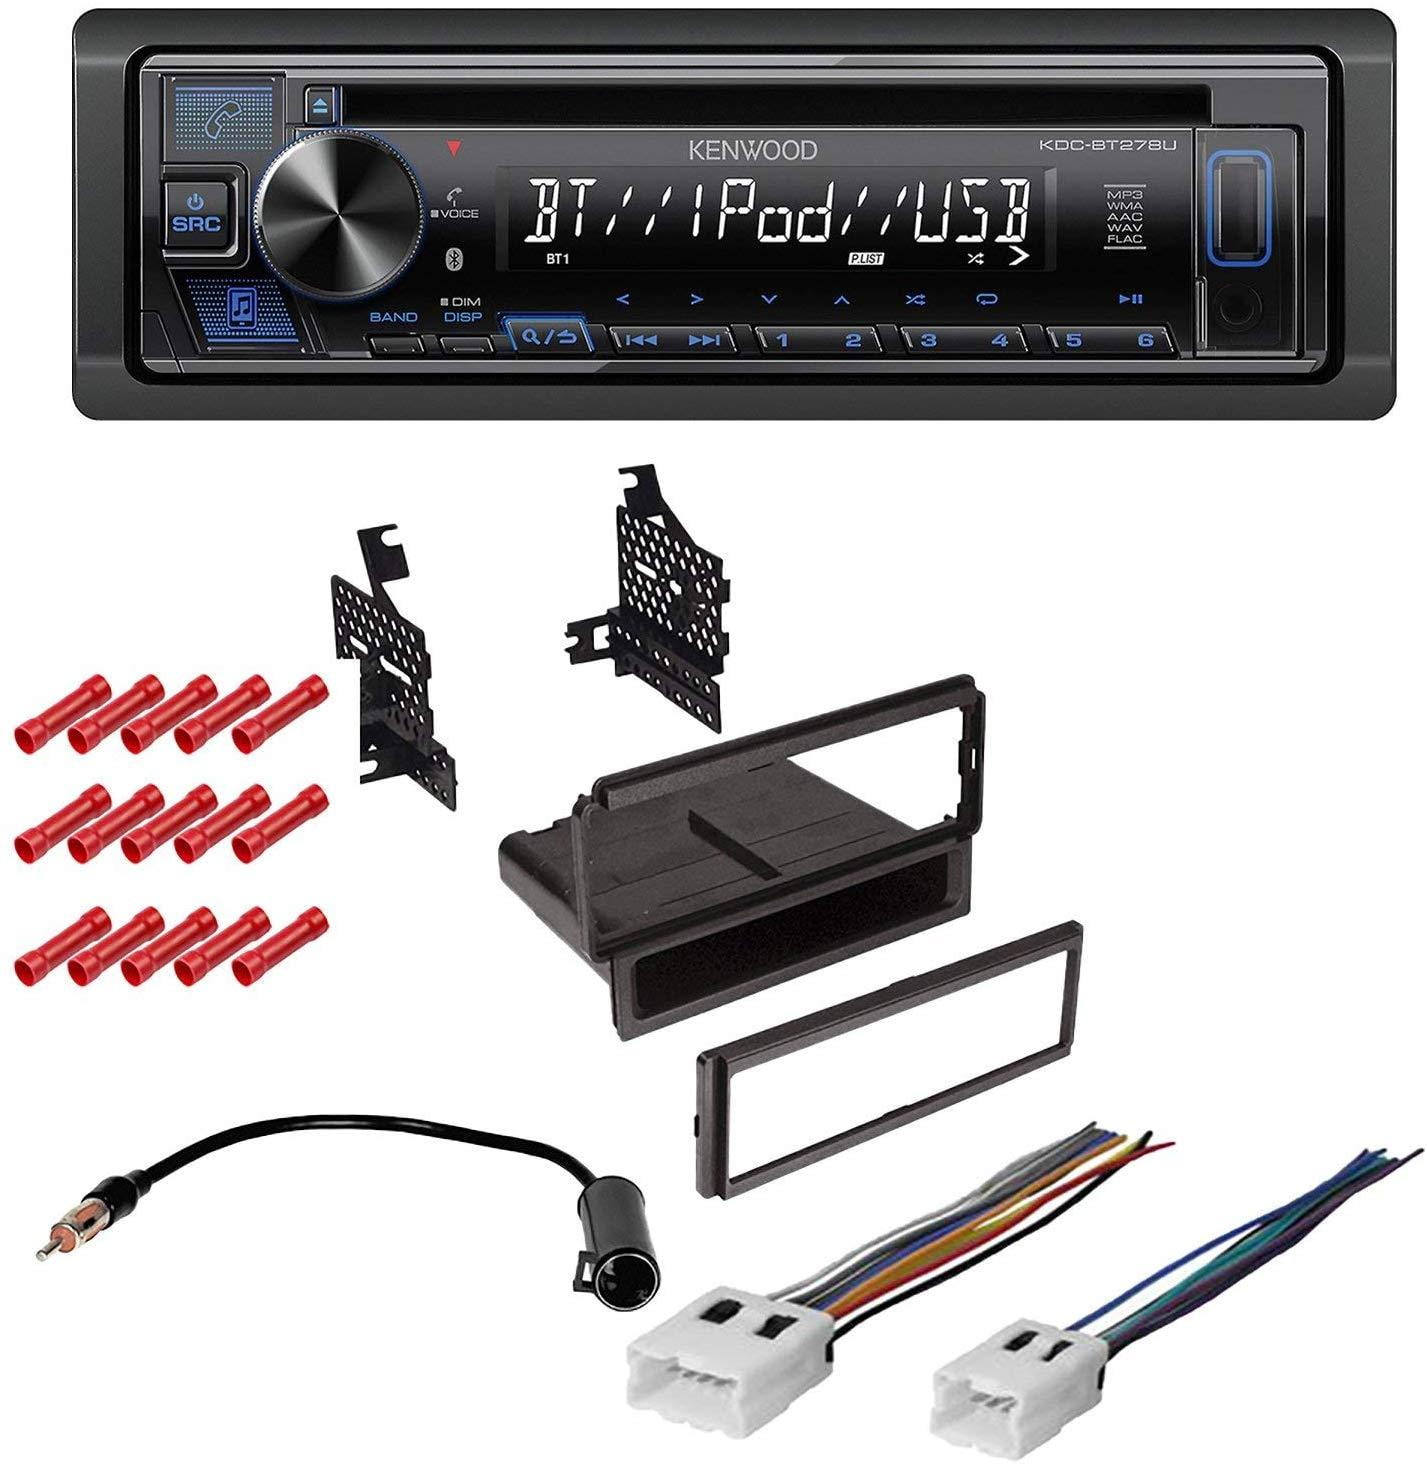 KIT8415 Kenwood Car Stereo with Bluetooth for 20082012